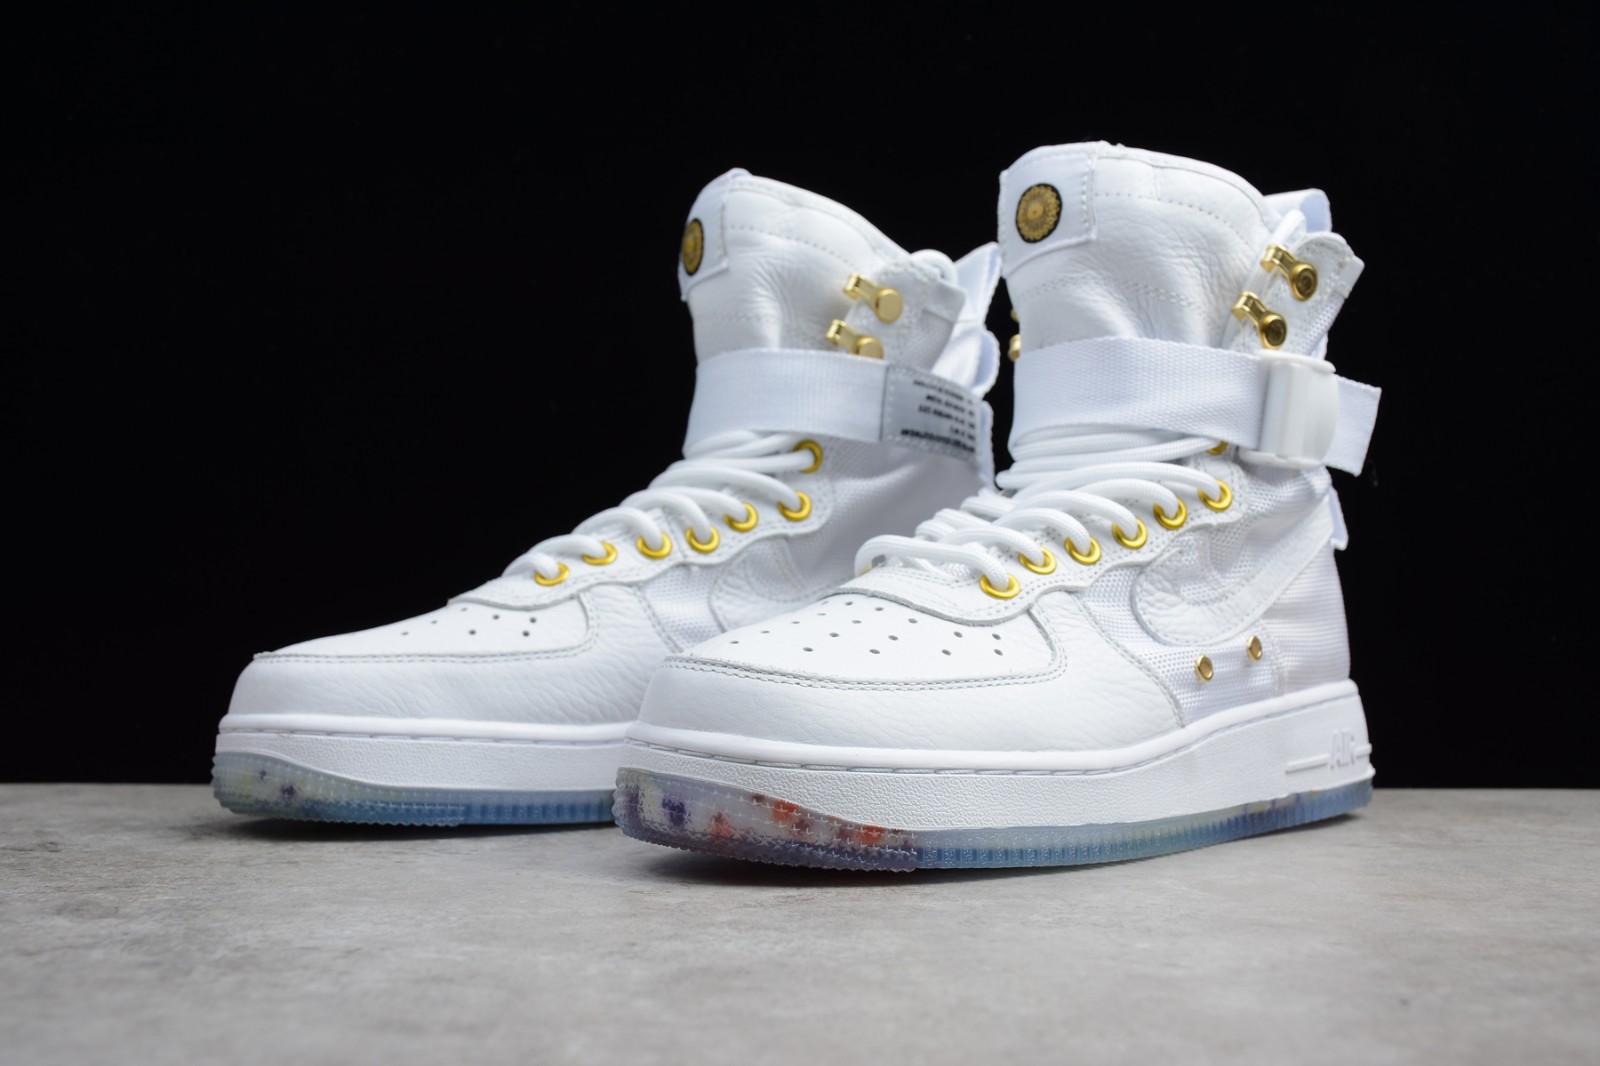 StclaircomoShops - Nike SF AF1 Mid CNY White Habanero Red AO9385 100 Mens and Womens Size nike air max graviton 360 release status